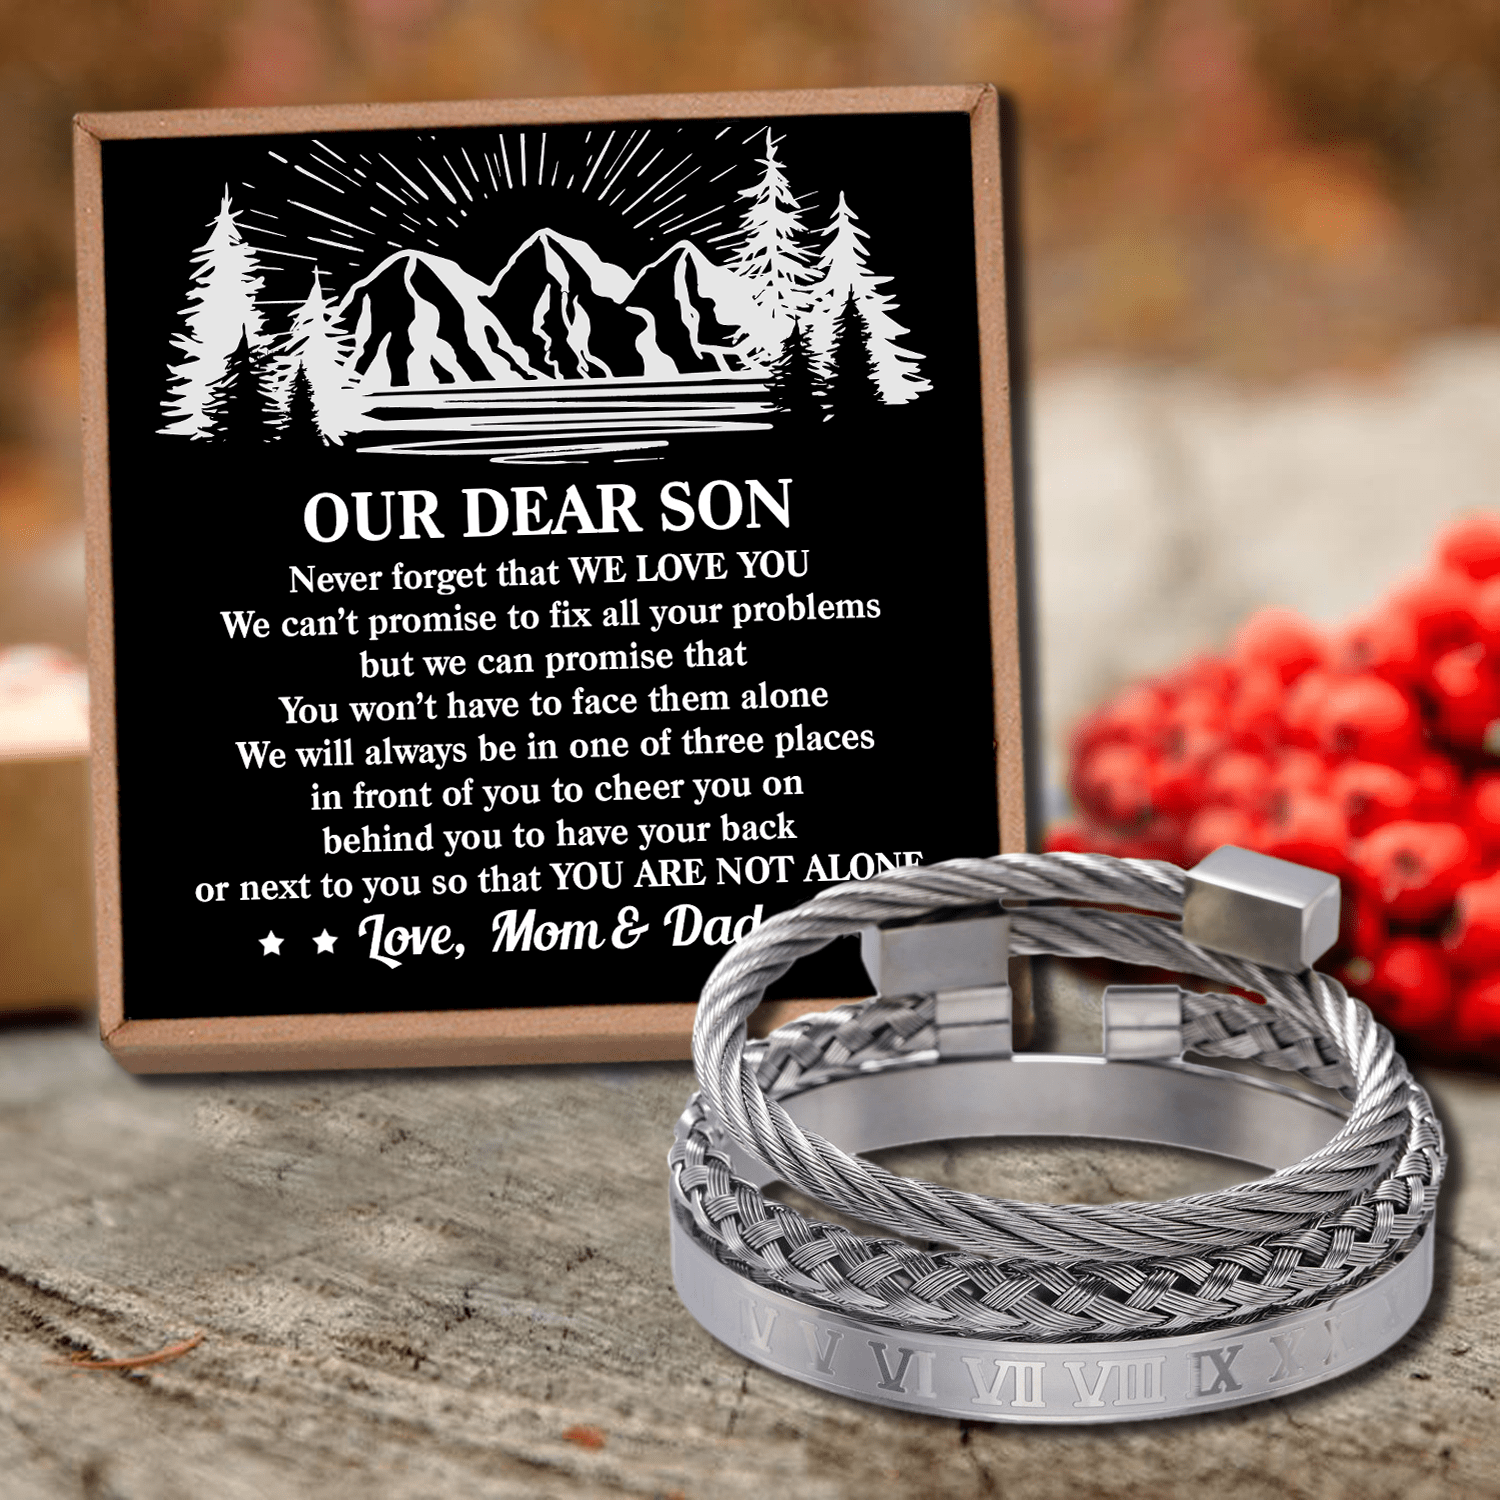 Bracelets To Our Son - You Are Not Alone Roman Numeral Bracelet Set GiveMe-Gifts